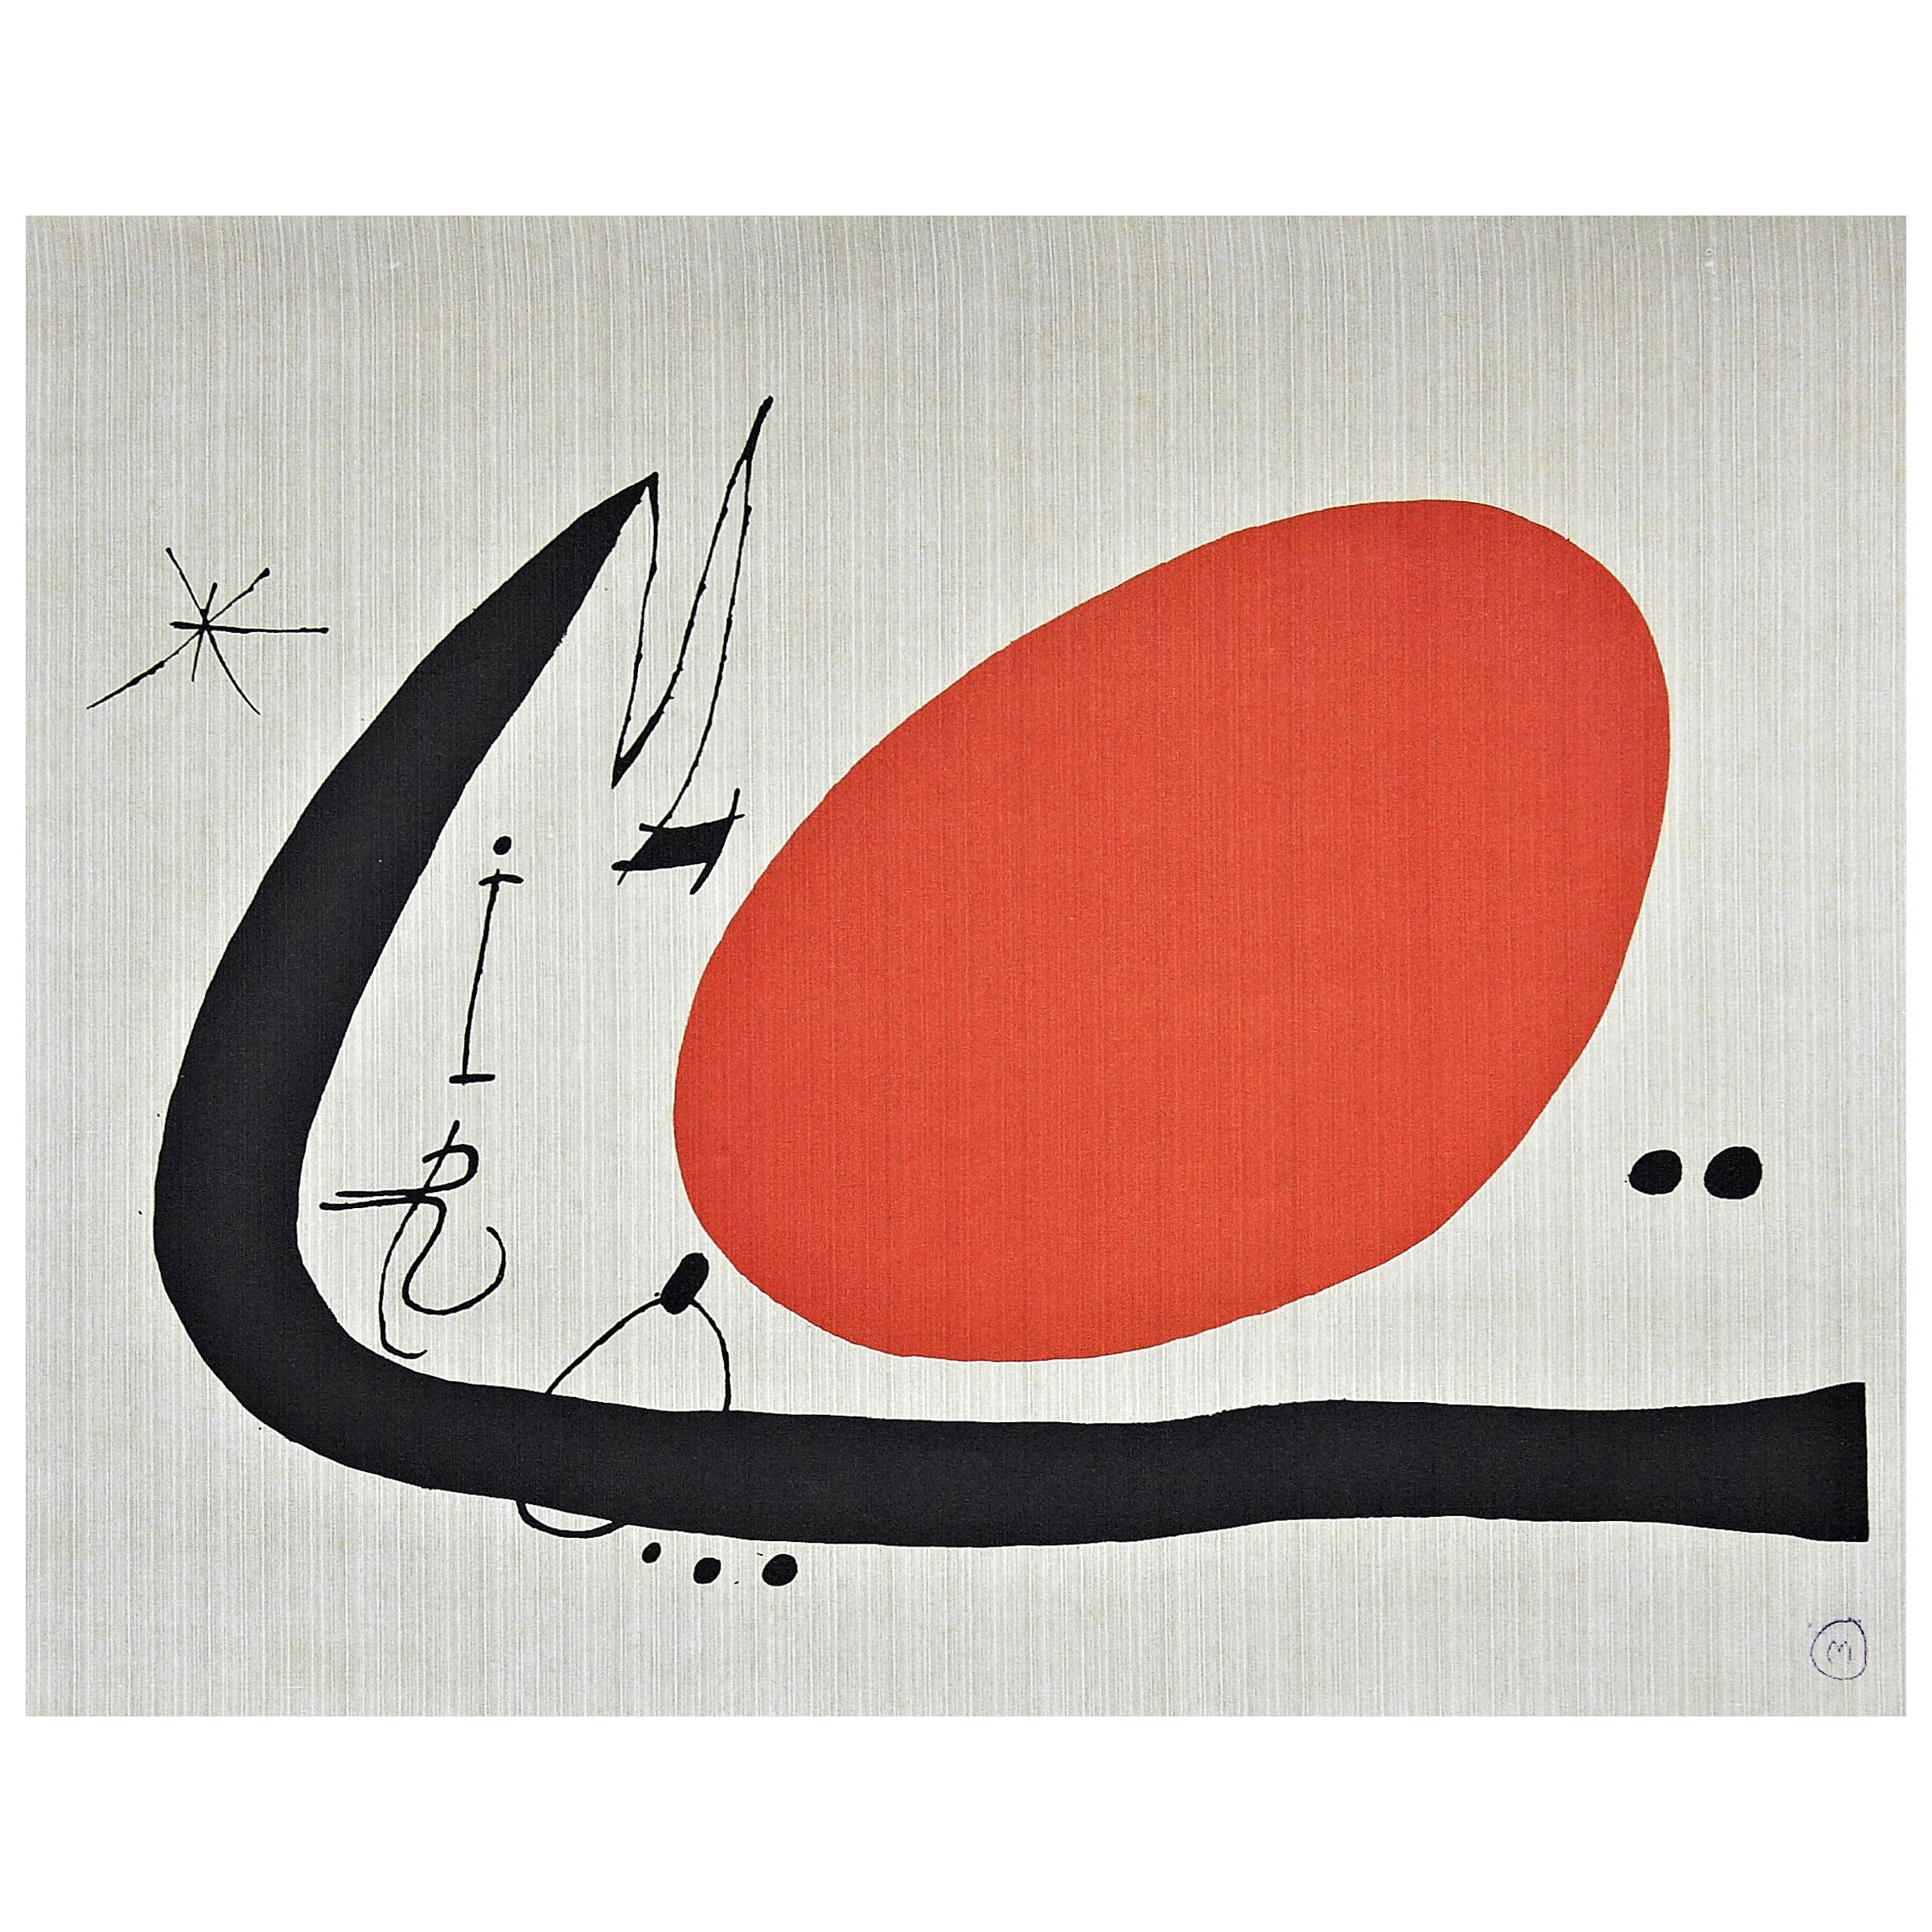 Joan Miró Lithography in Textil Fabric, 1970